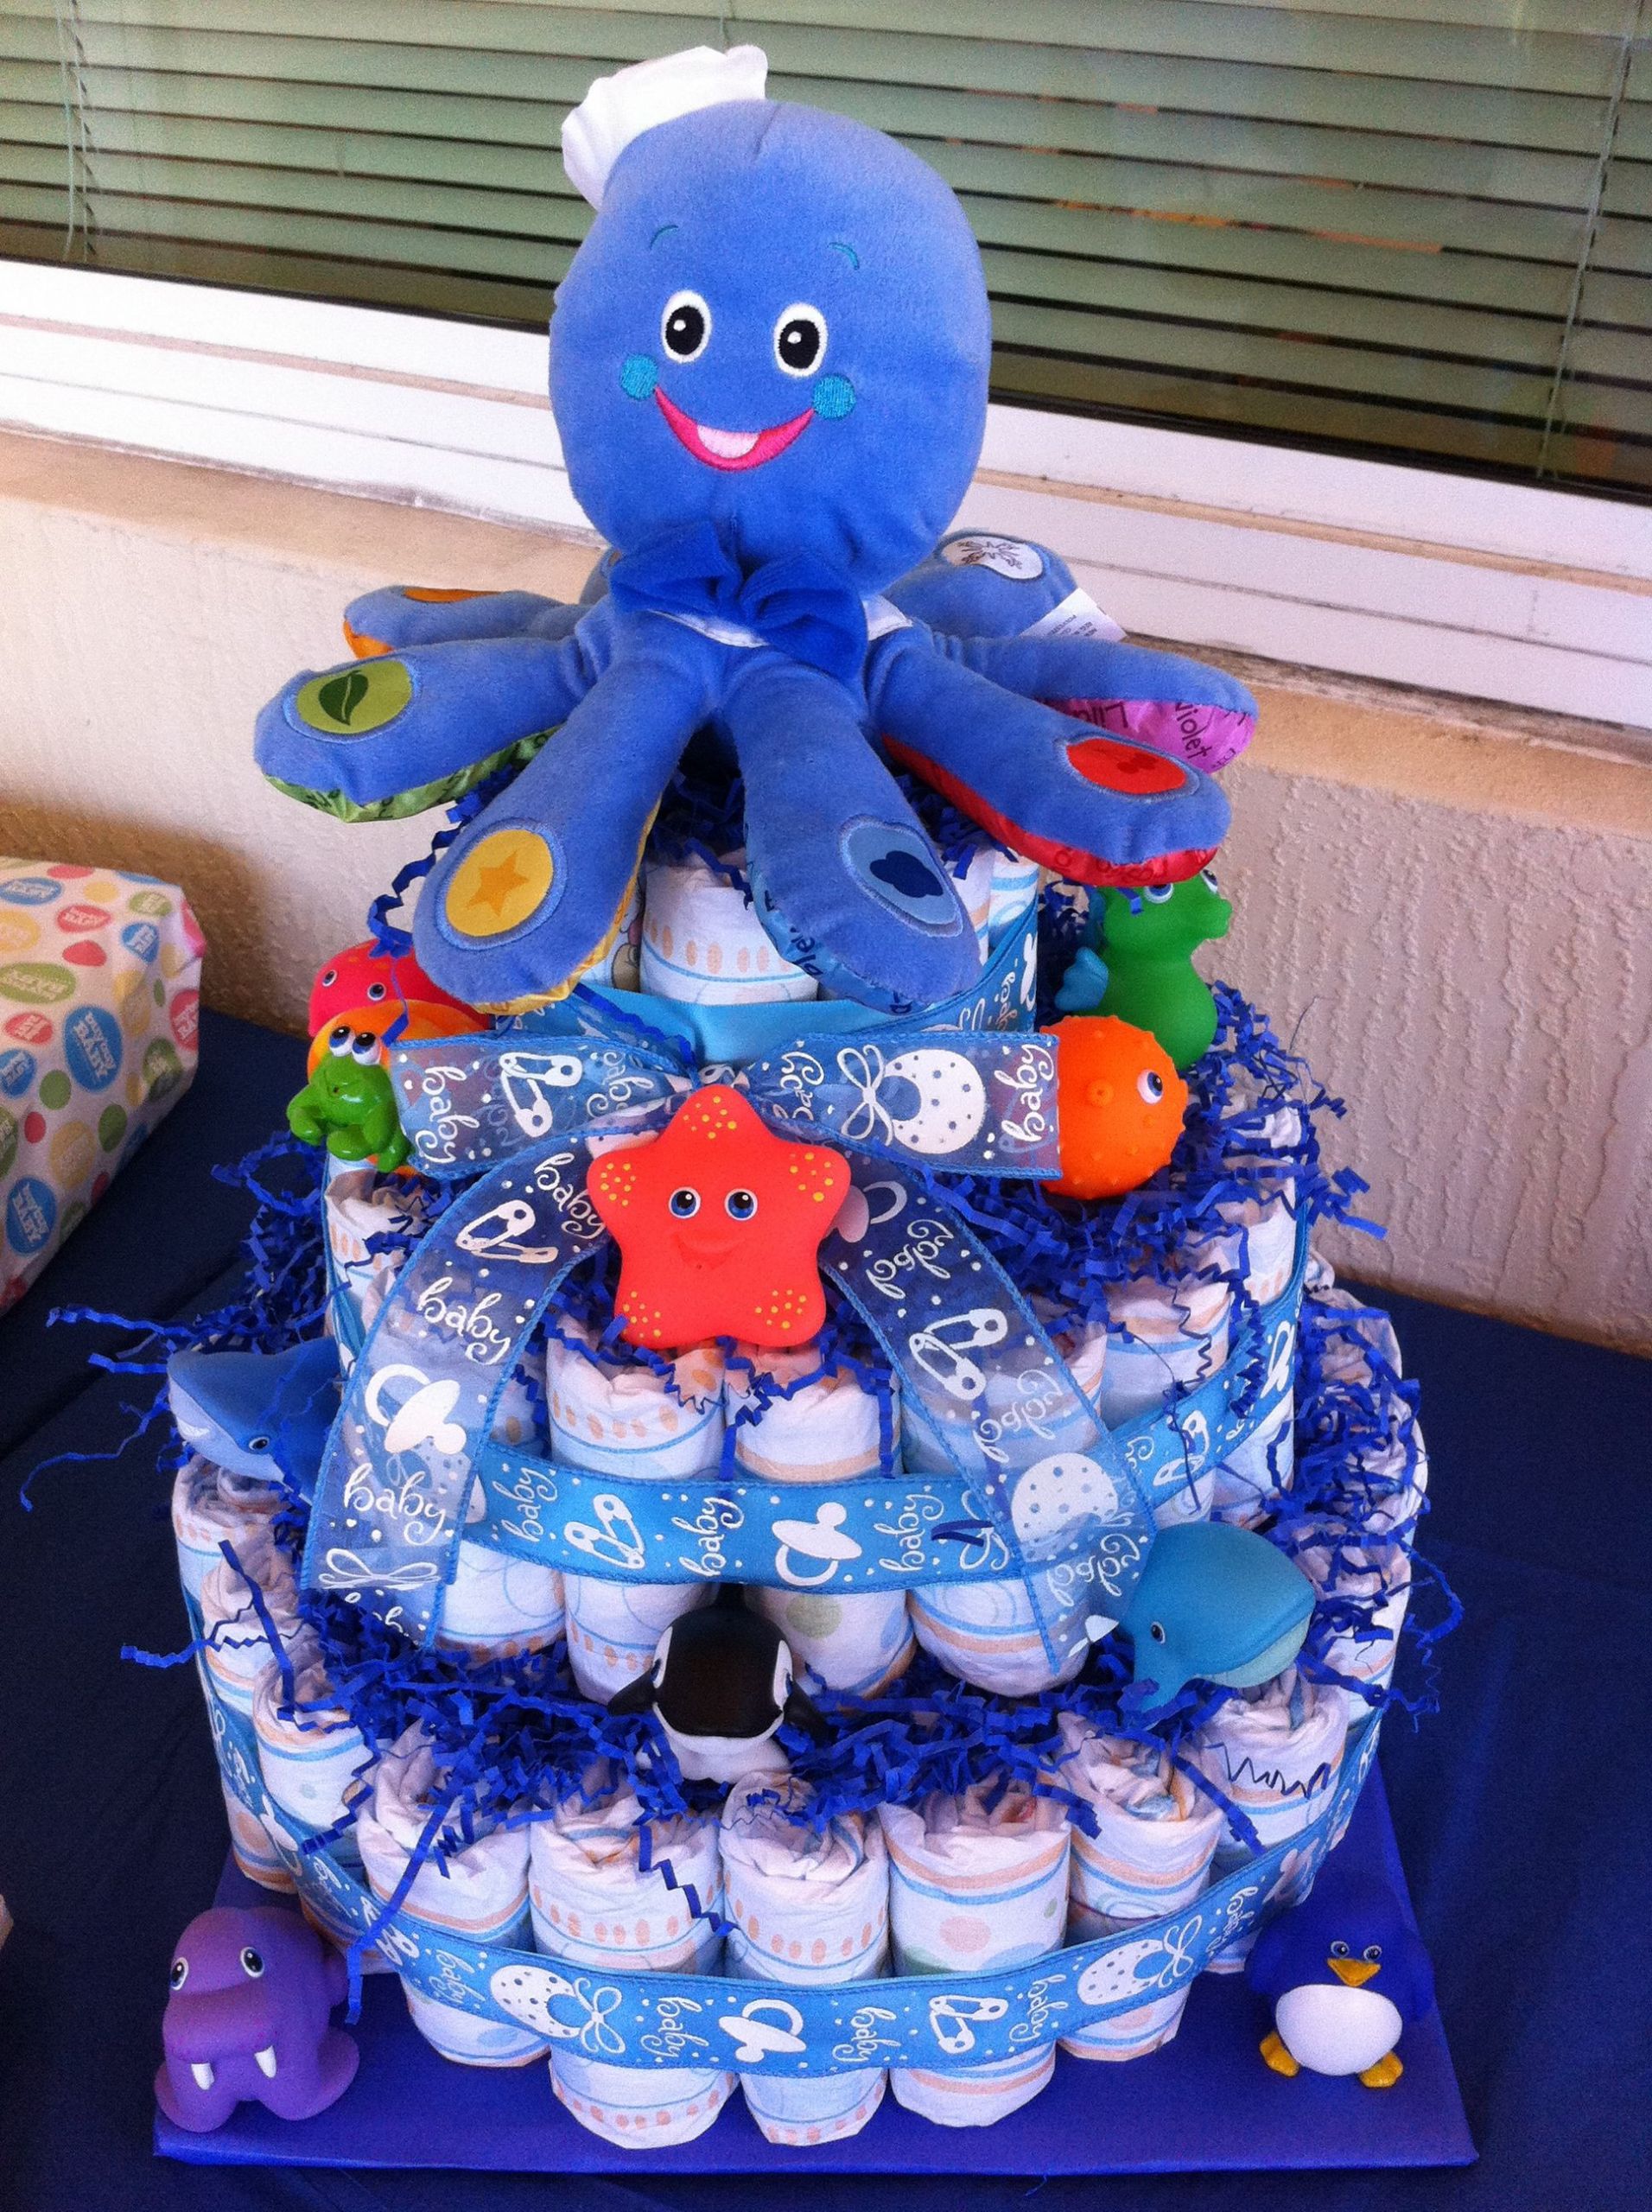 Pinterest Crafts For Baby Showers
 Diaper cake for boy baby shower Craft Ideas